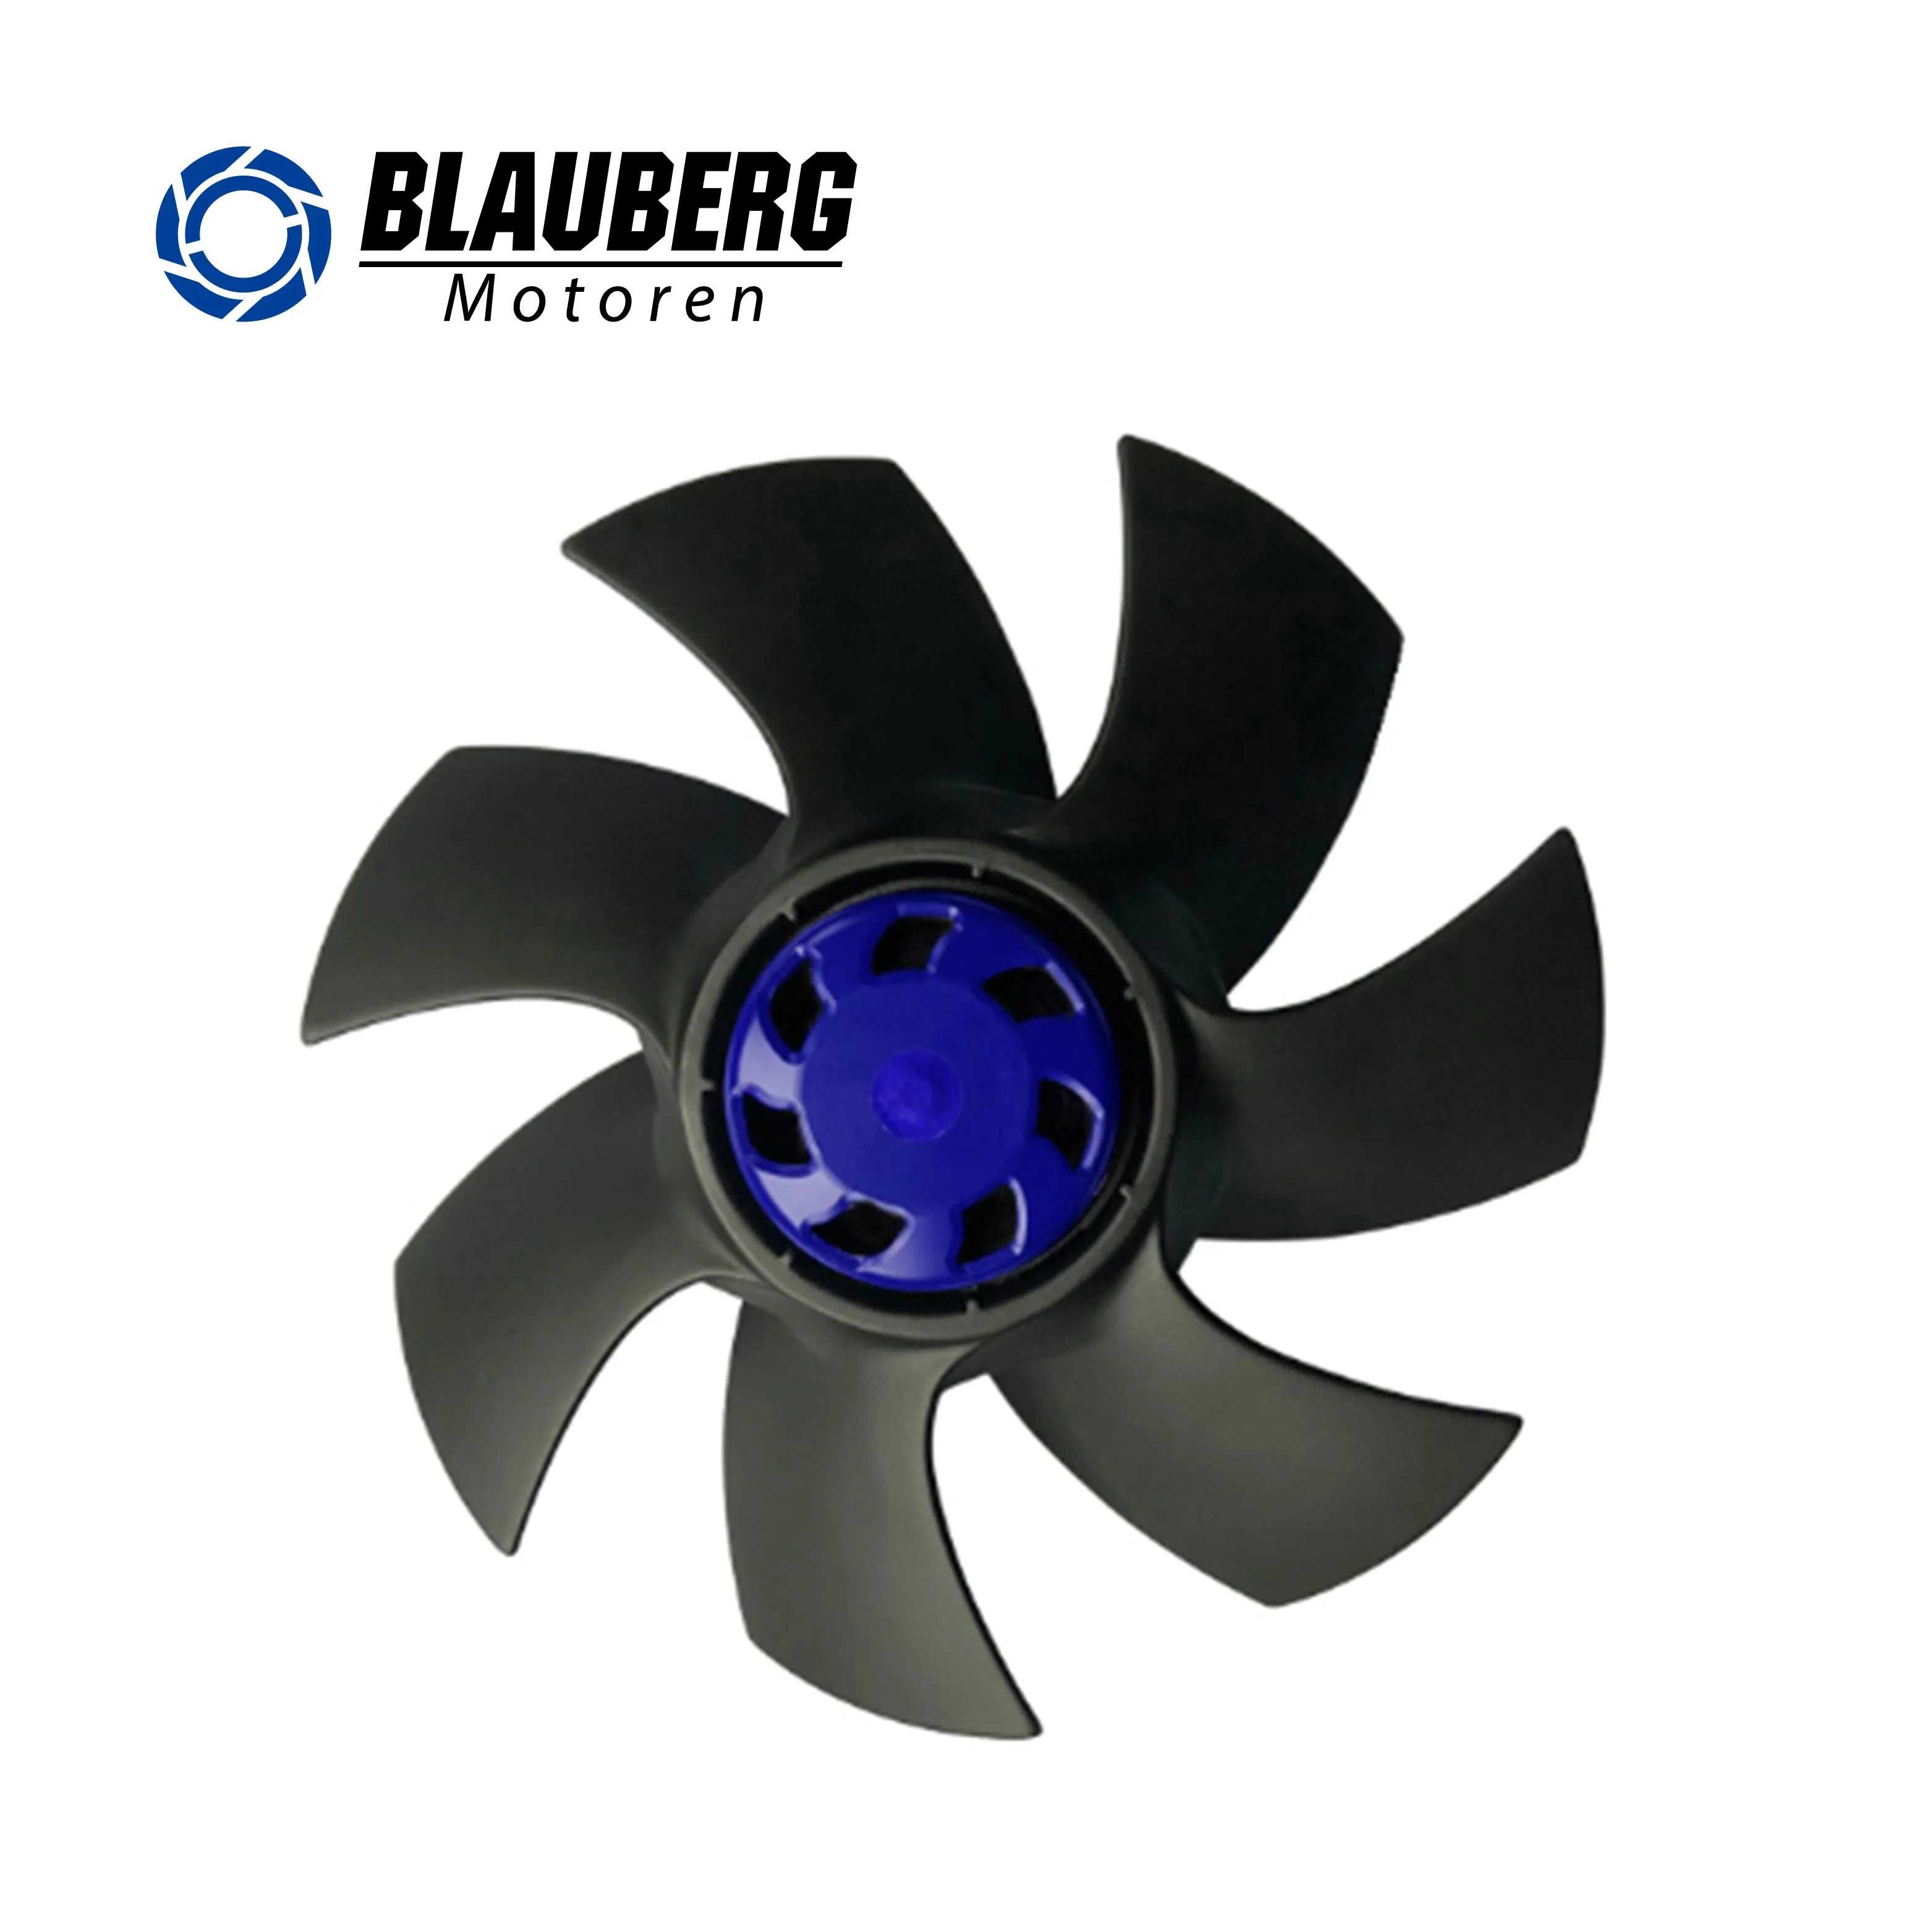 Blauberg 250mm External Rotor Motor EC axial fan for cooling and ventilation system